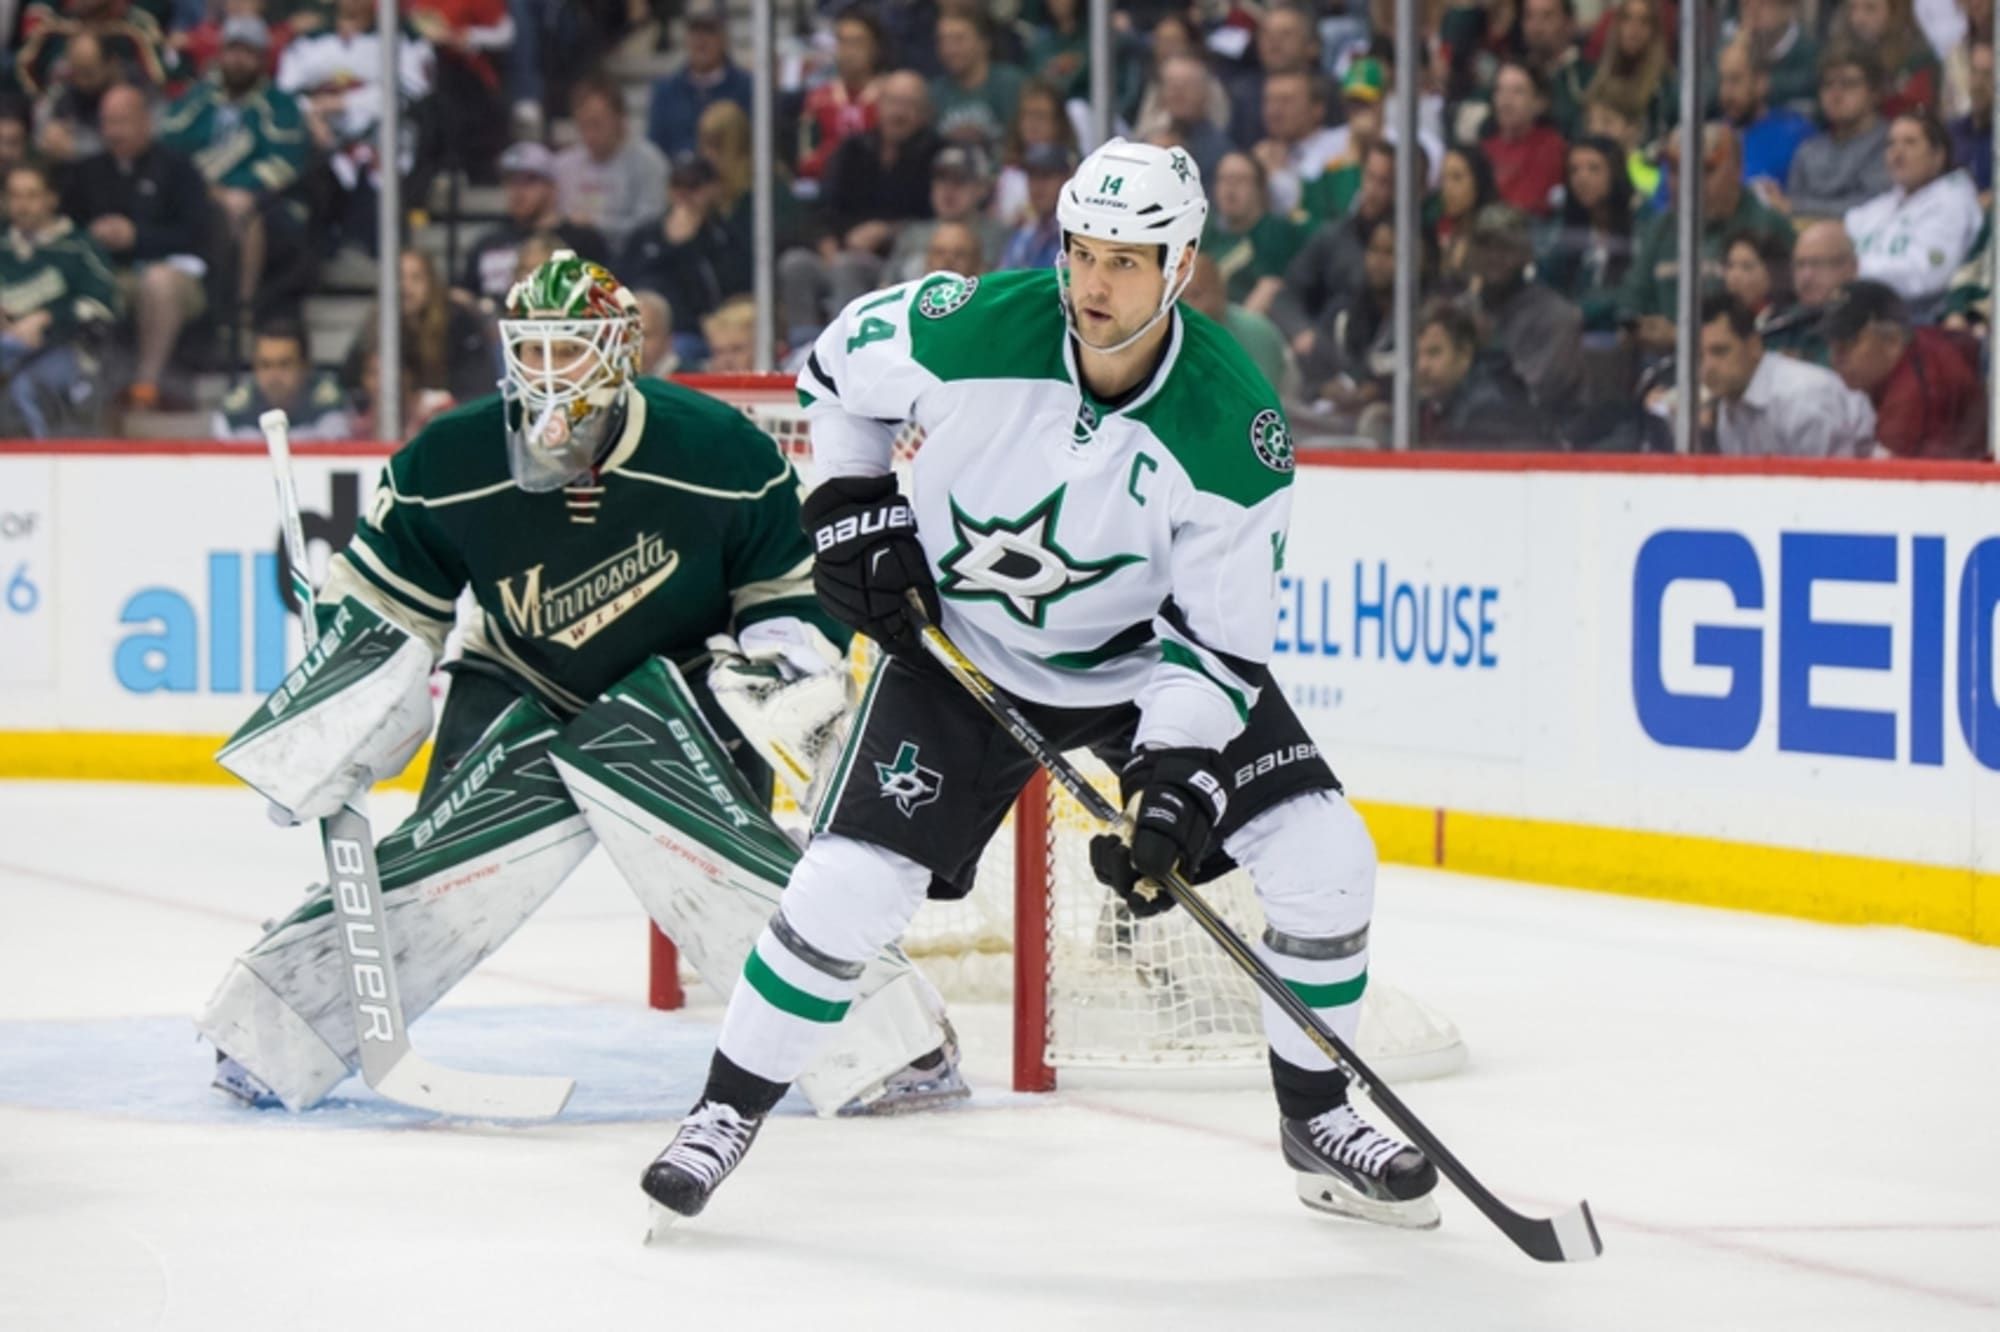 AHL - Jamie Benn had a goal in the Dallas Stars Game 5 win yesterday. He  had 14 goals for the Texas Stars in the 2010 Calder Cup Playoffs.